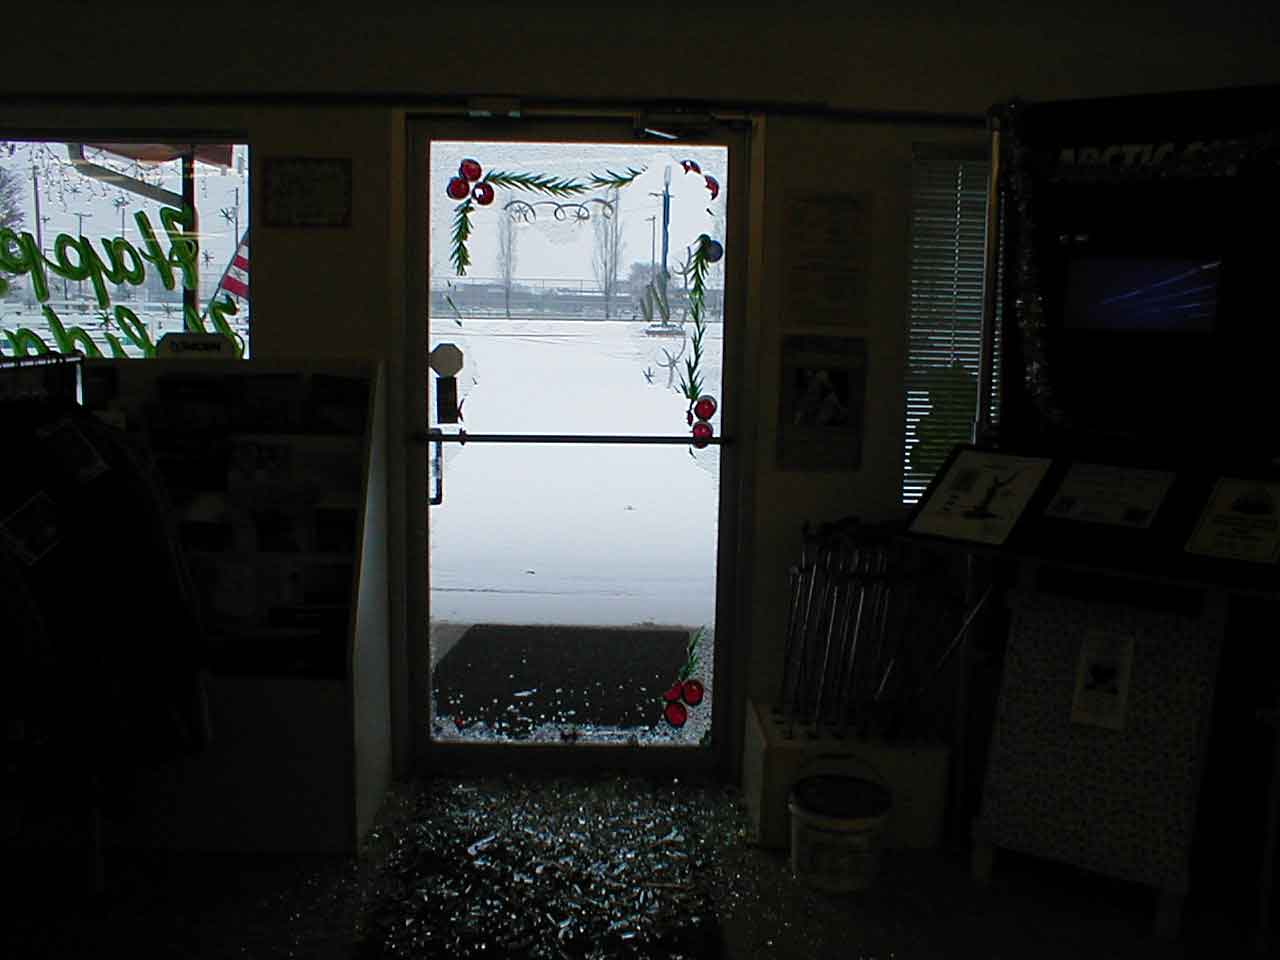 Interior shot of the broken door and broken glass on the floor. You can see Christmas decorations on the outside of the door.